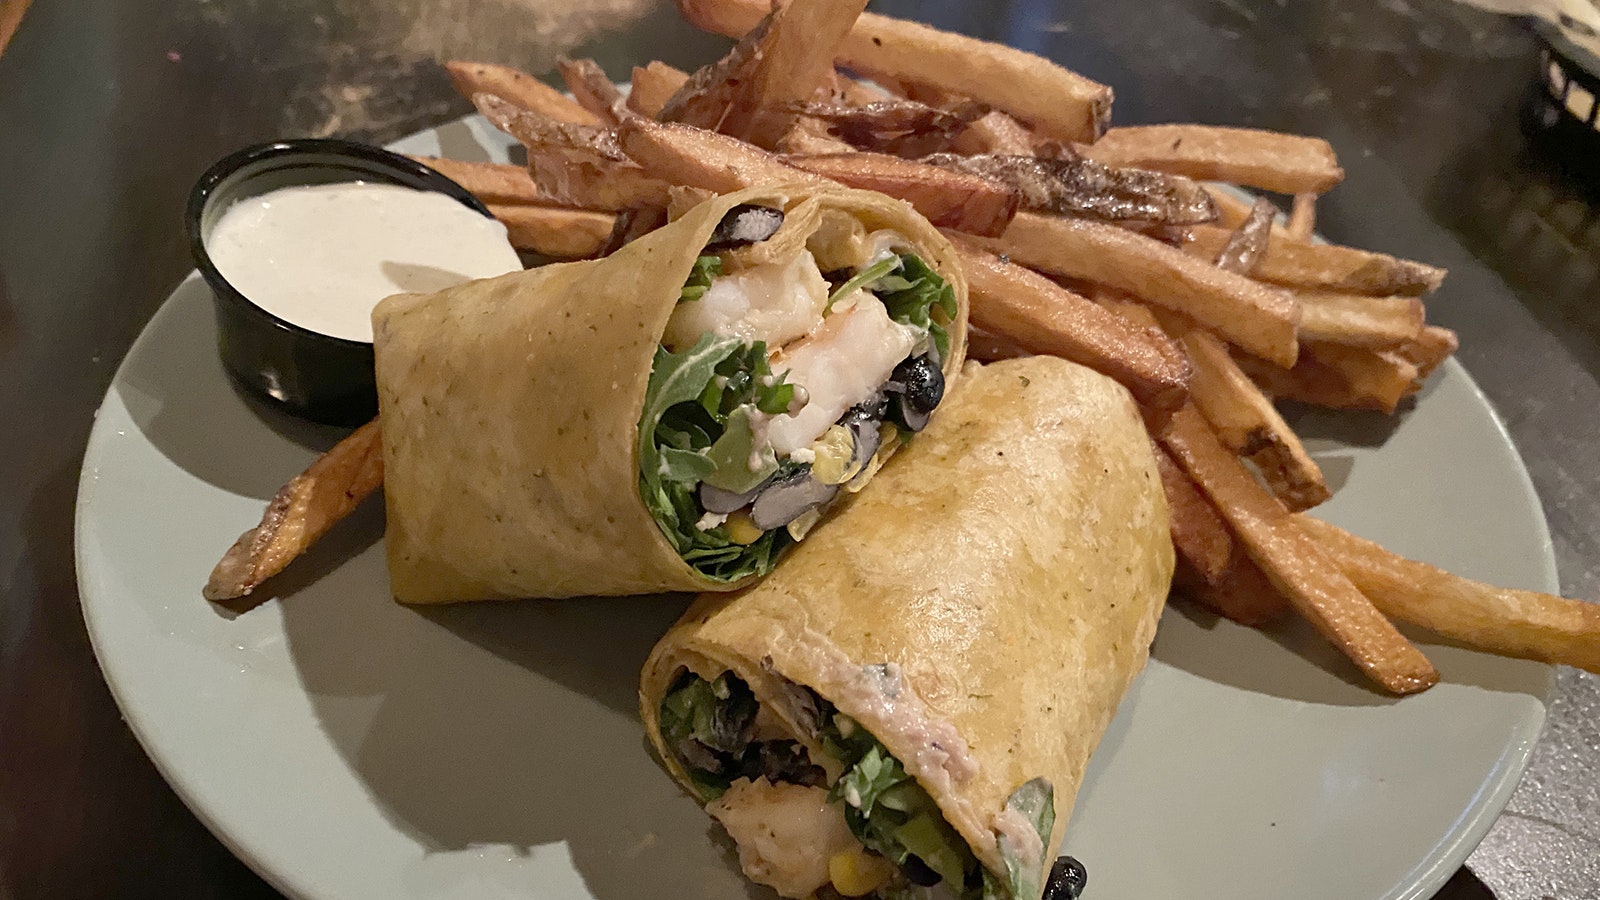 The shrimp wrap is a new addition to the winter menu.